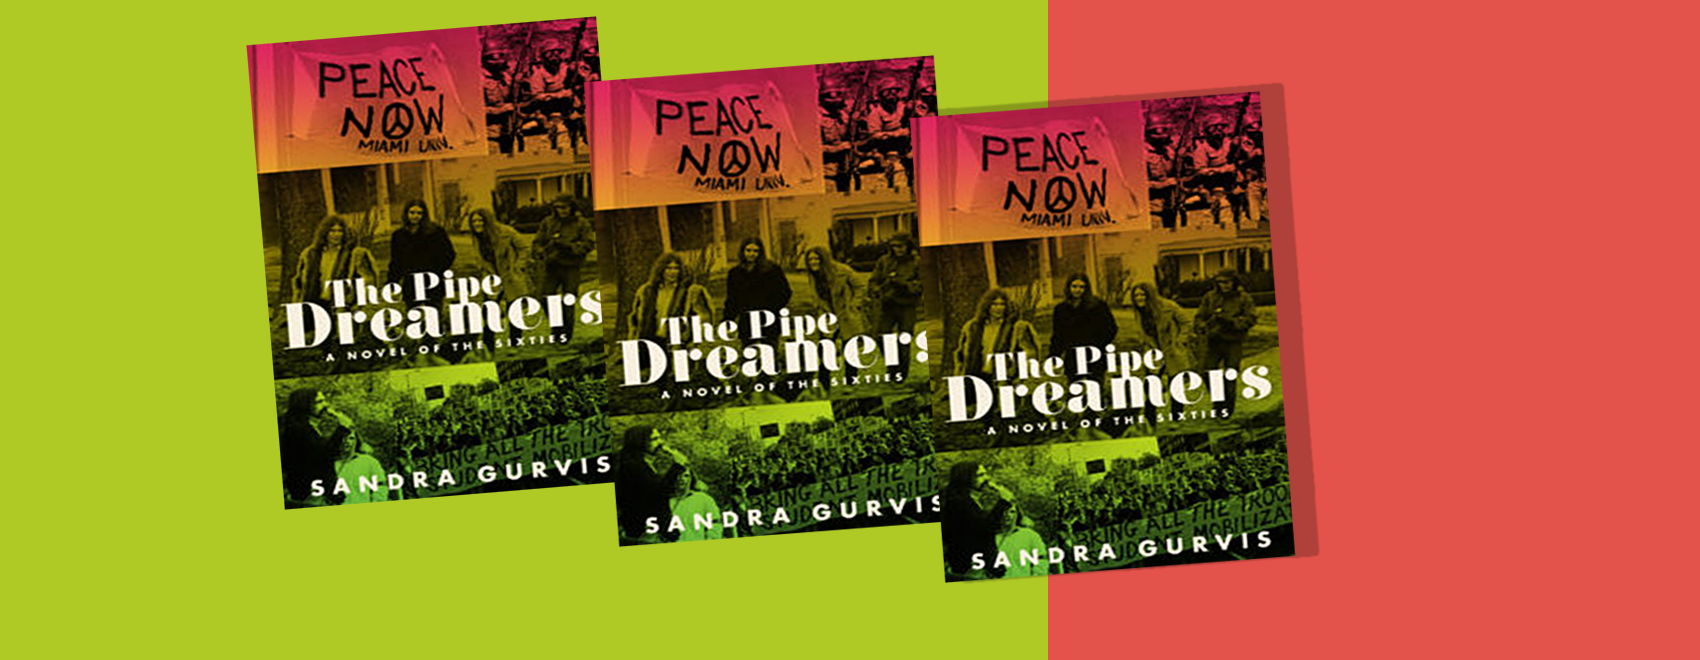 Pipe Dreamers